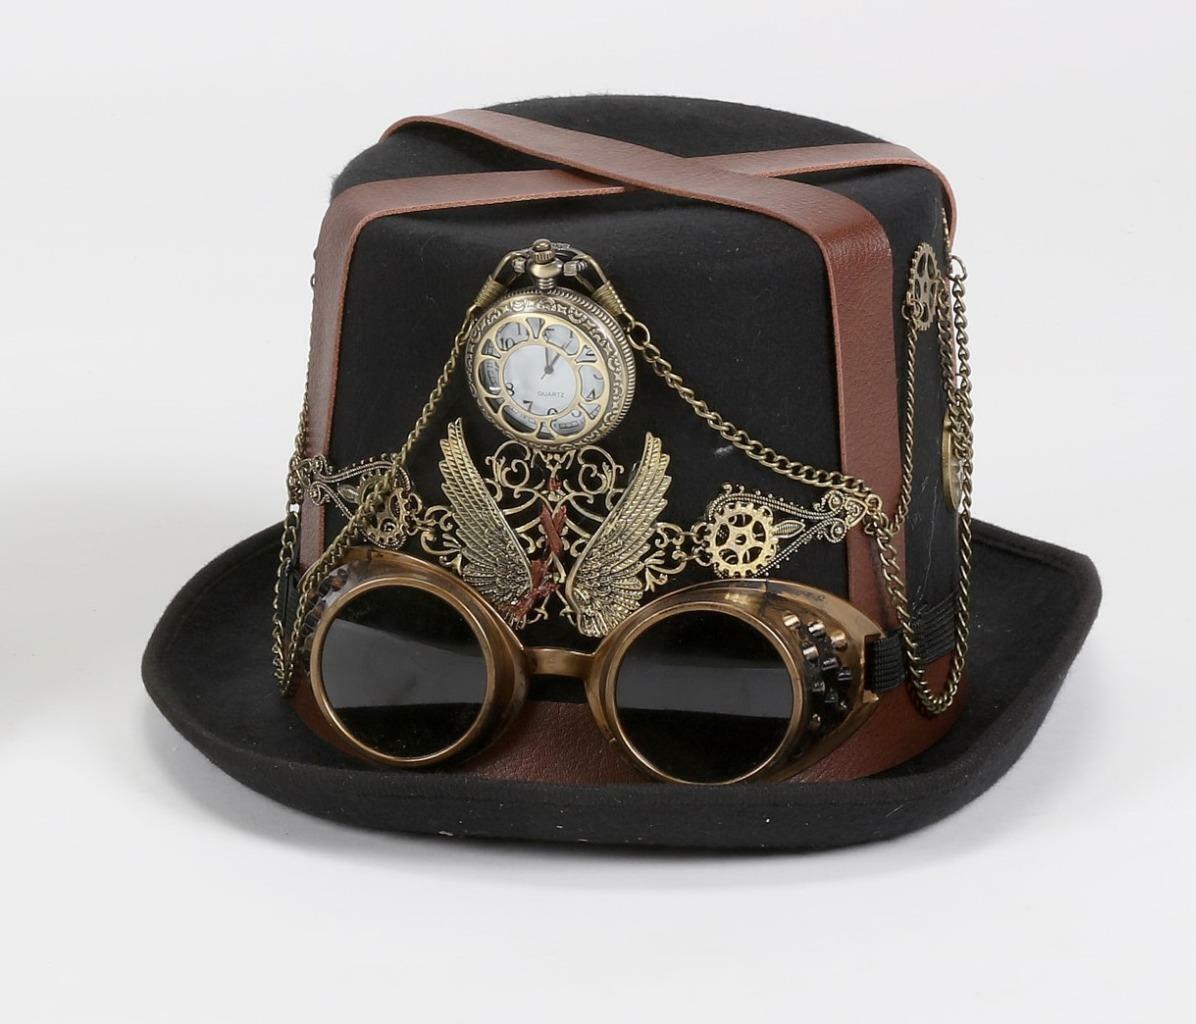 180 Degrees Steampunk Halloween Costume Top Hat Pocketwatch Decor Accent Adult